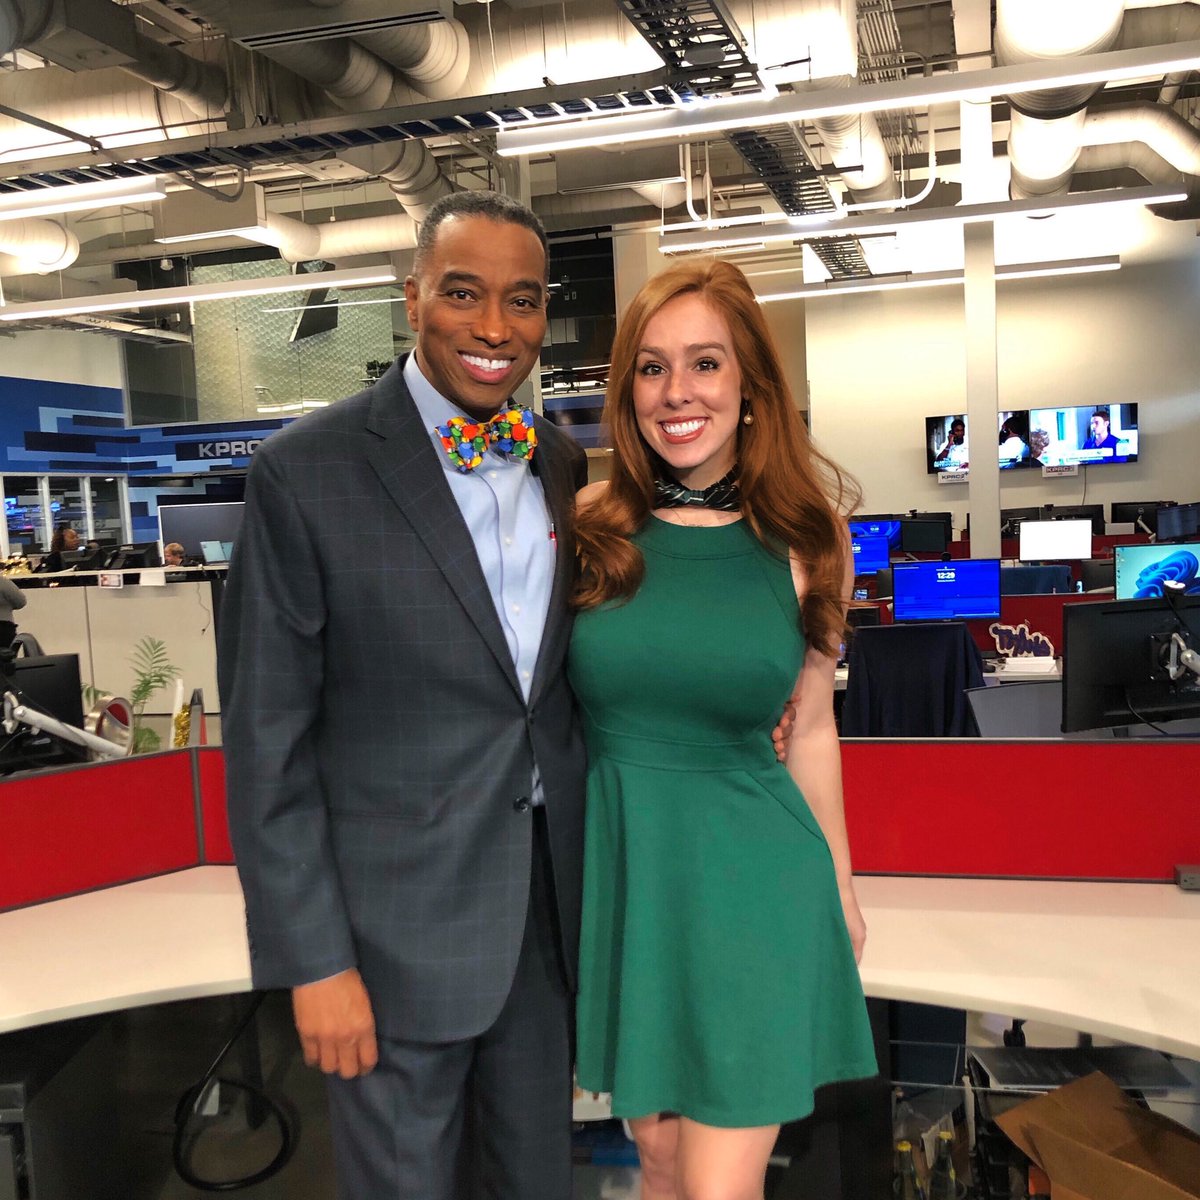 Happy Retirement Khambrel! Kham’s always been the kindest and most classy man in the newsroom. It’s been an honor learning from him as a college intern, and working alongside him as a colleague. Congratulations on 48 years!! 🥳 @KPRC2 @KPRC2Khambrel